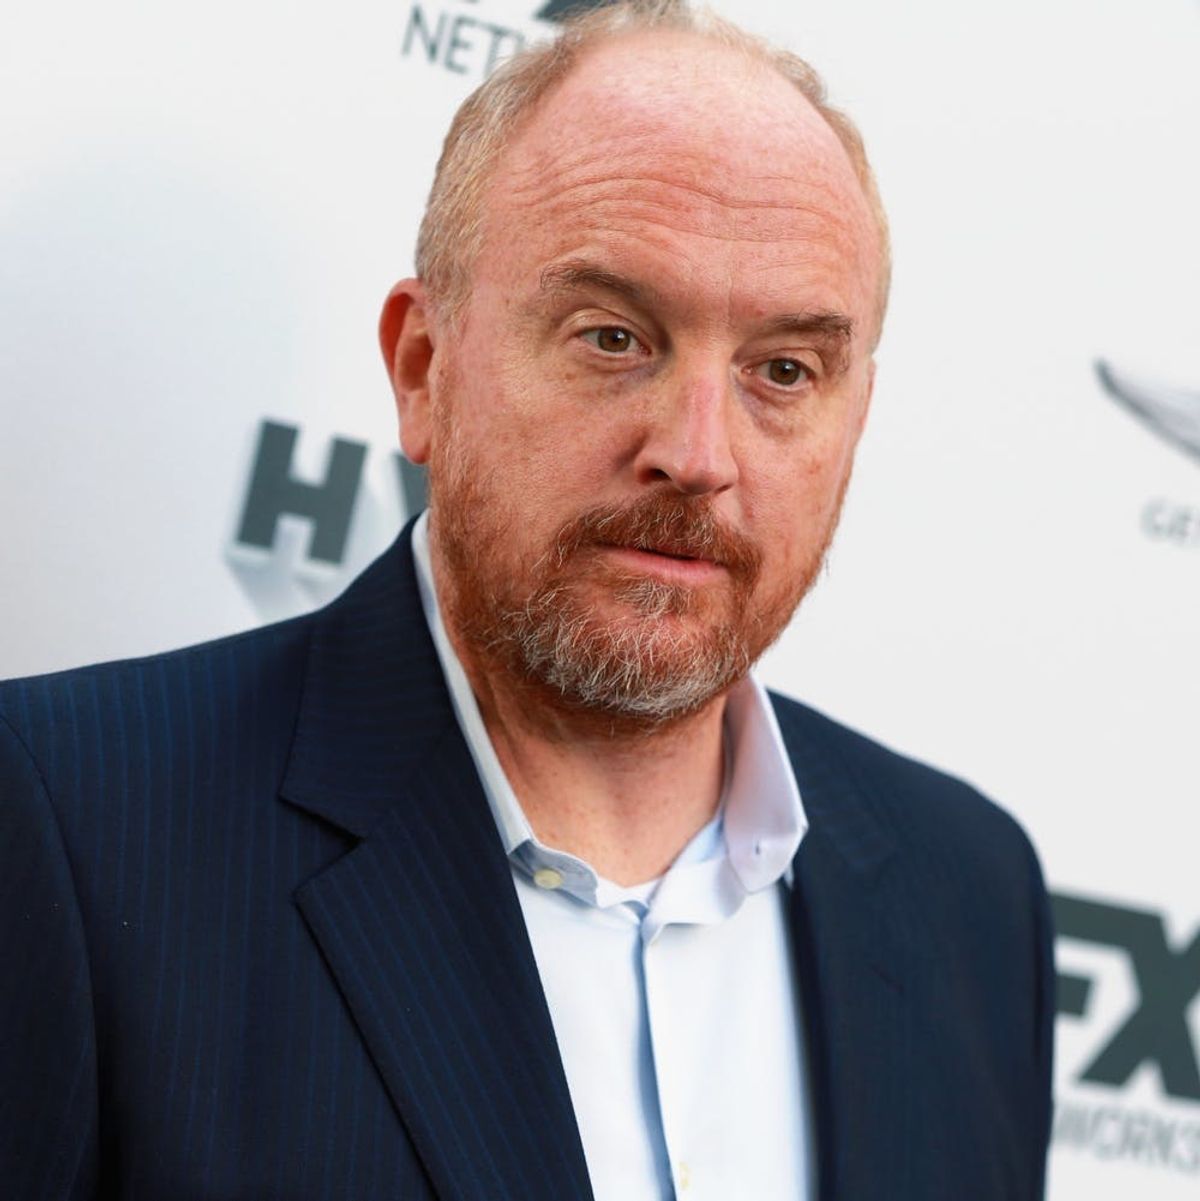 Comedian Louis C.K. Has Reportedly Cancelled All Appearances *AND* His Latest Movie’s Release Ahead of a “N.Y. Times” Story